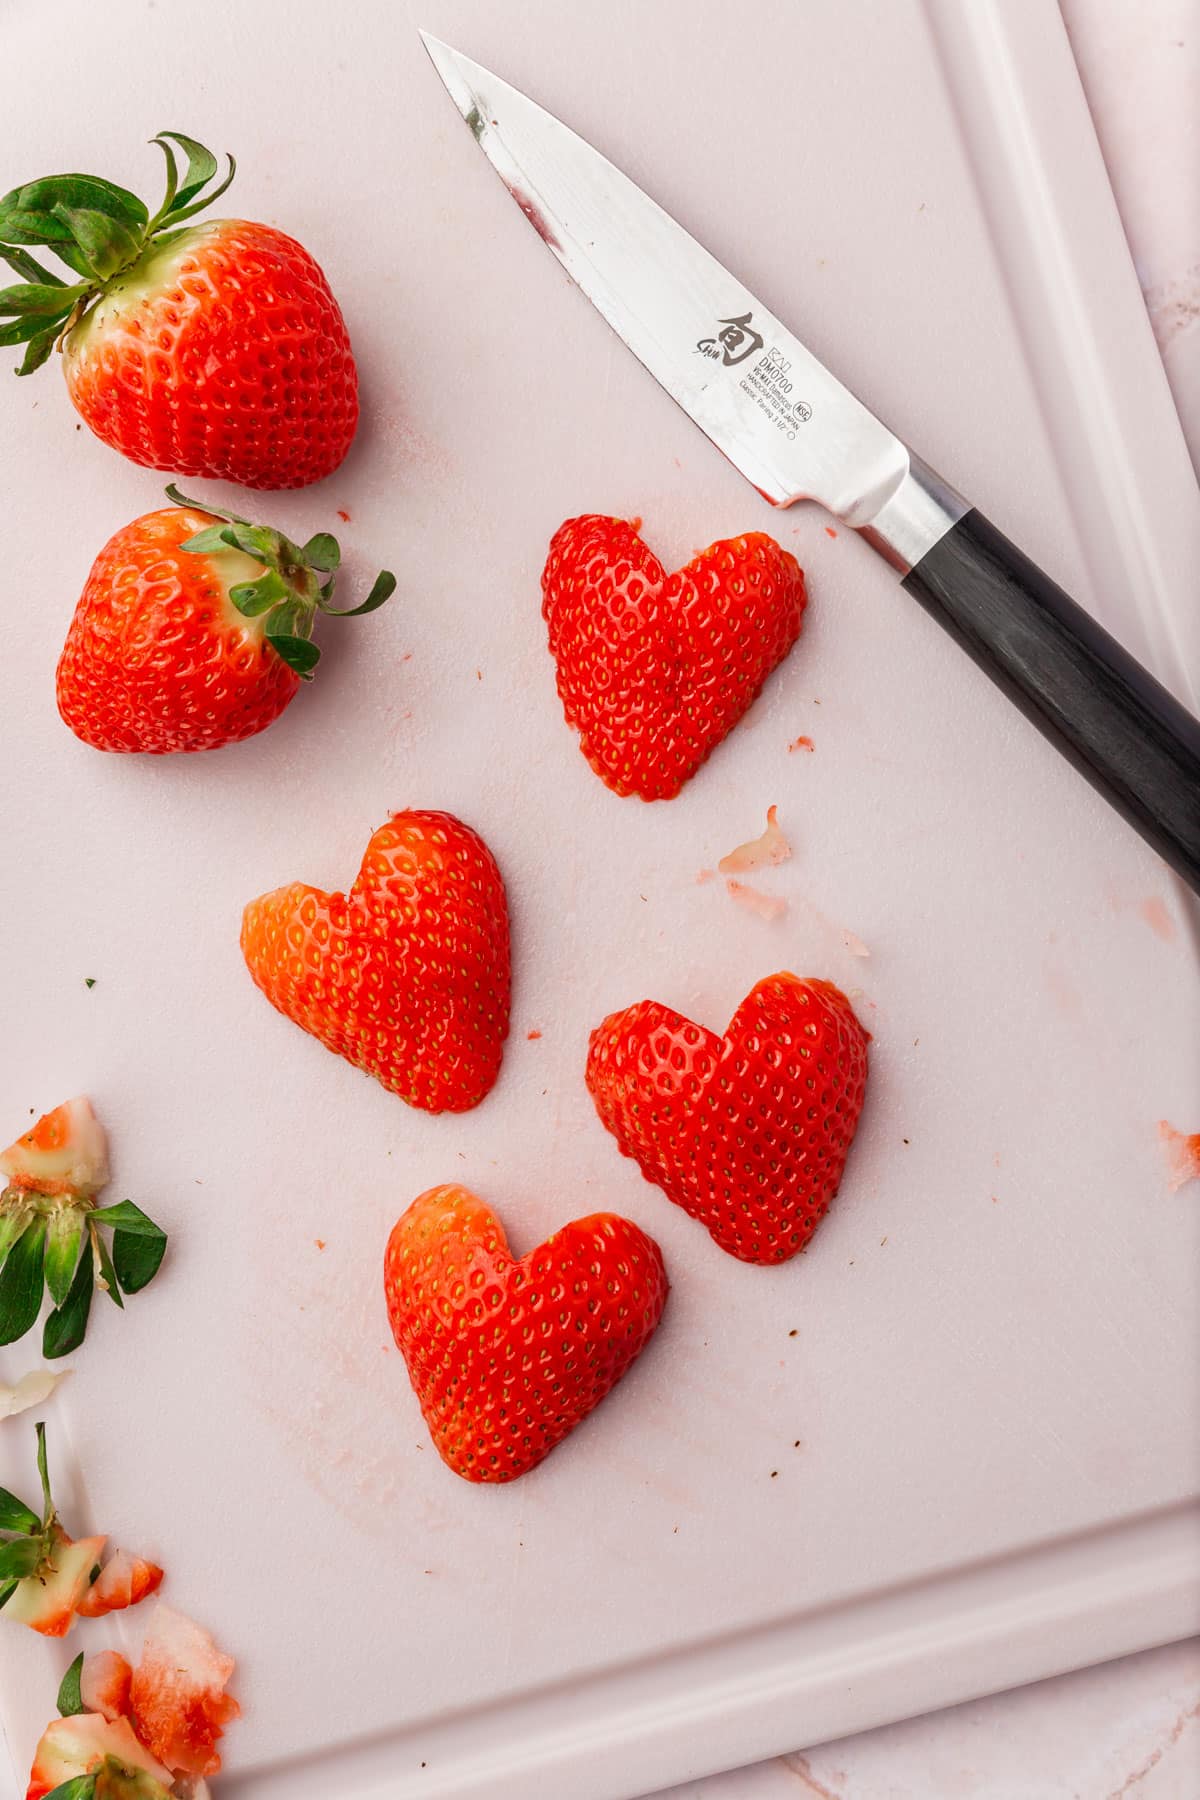 Strawberries sliced to look like hearts on a cutting board with a knife.